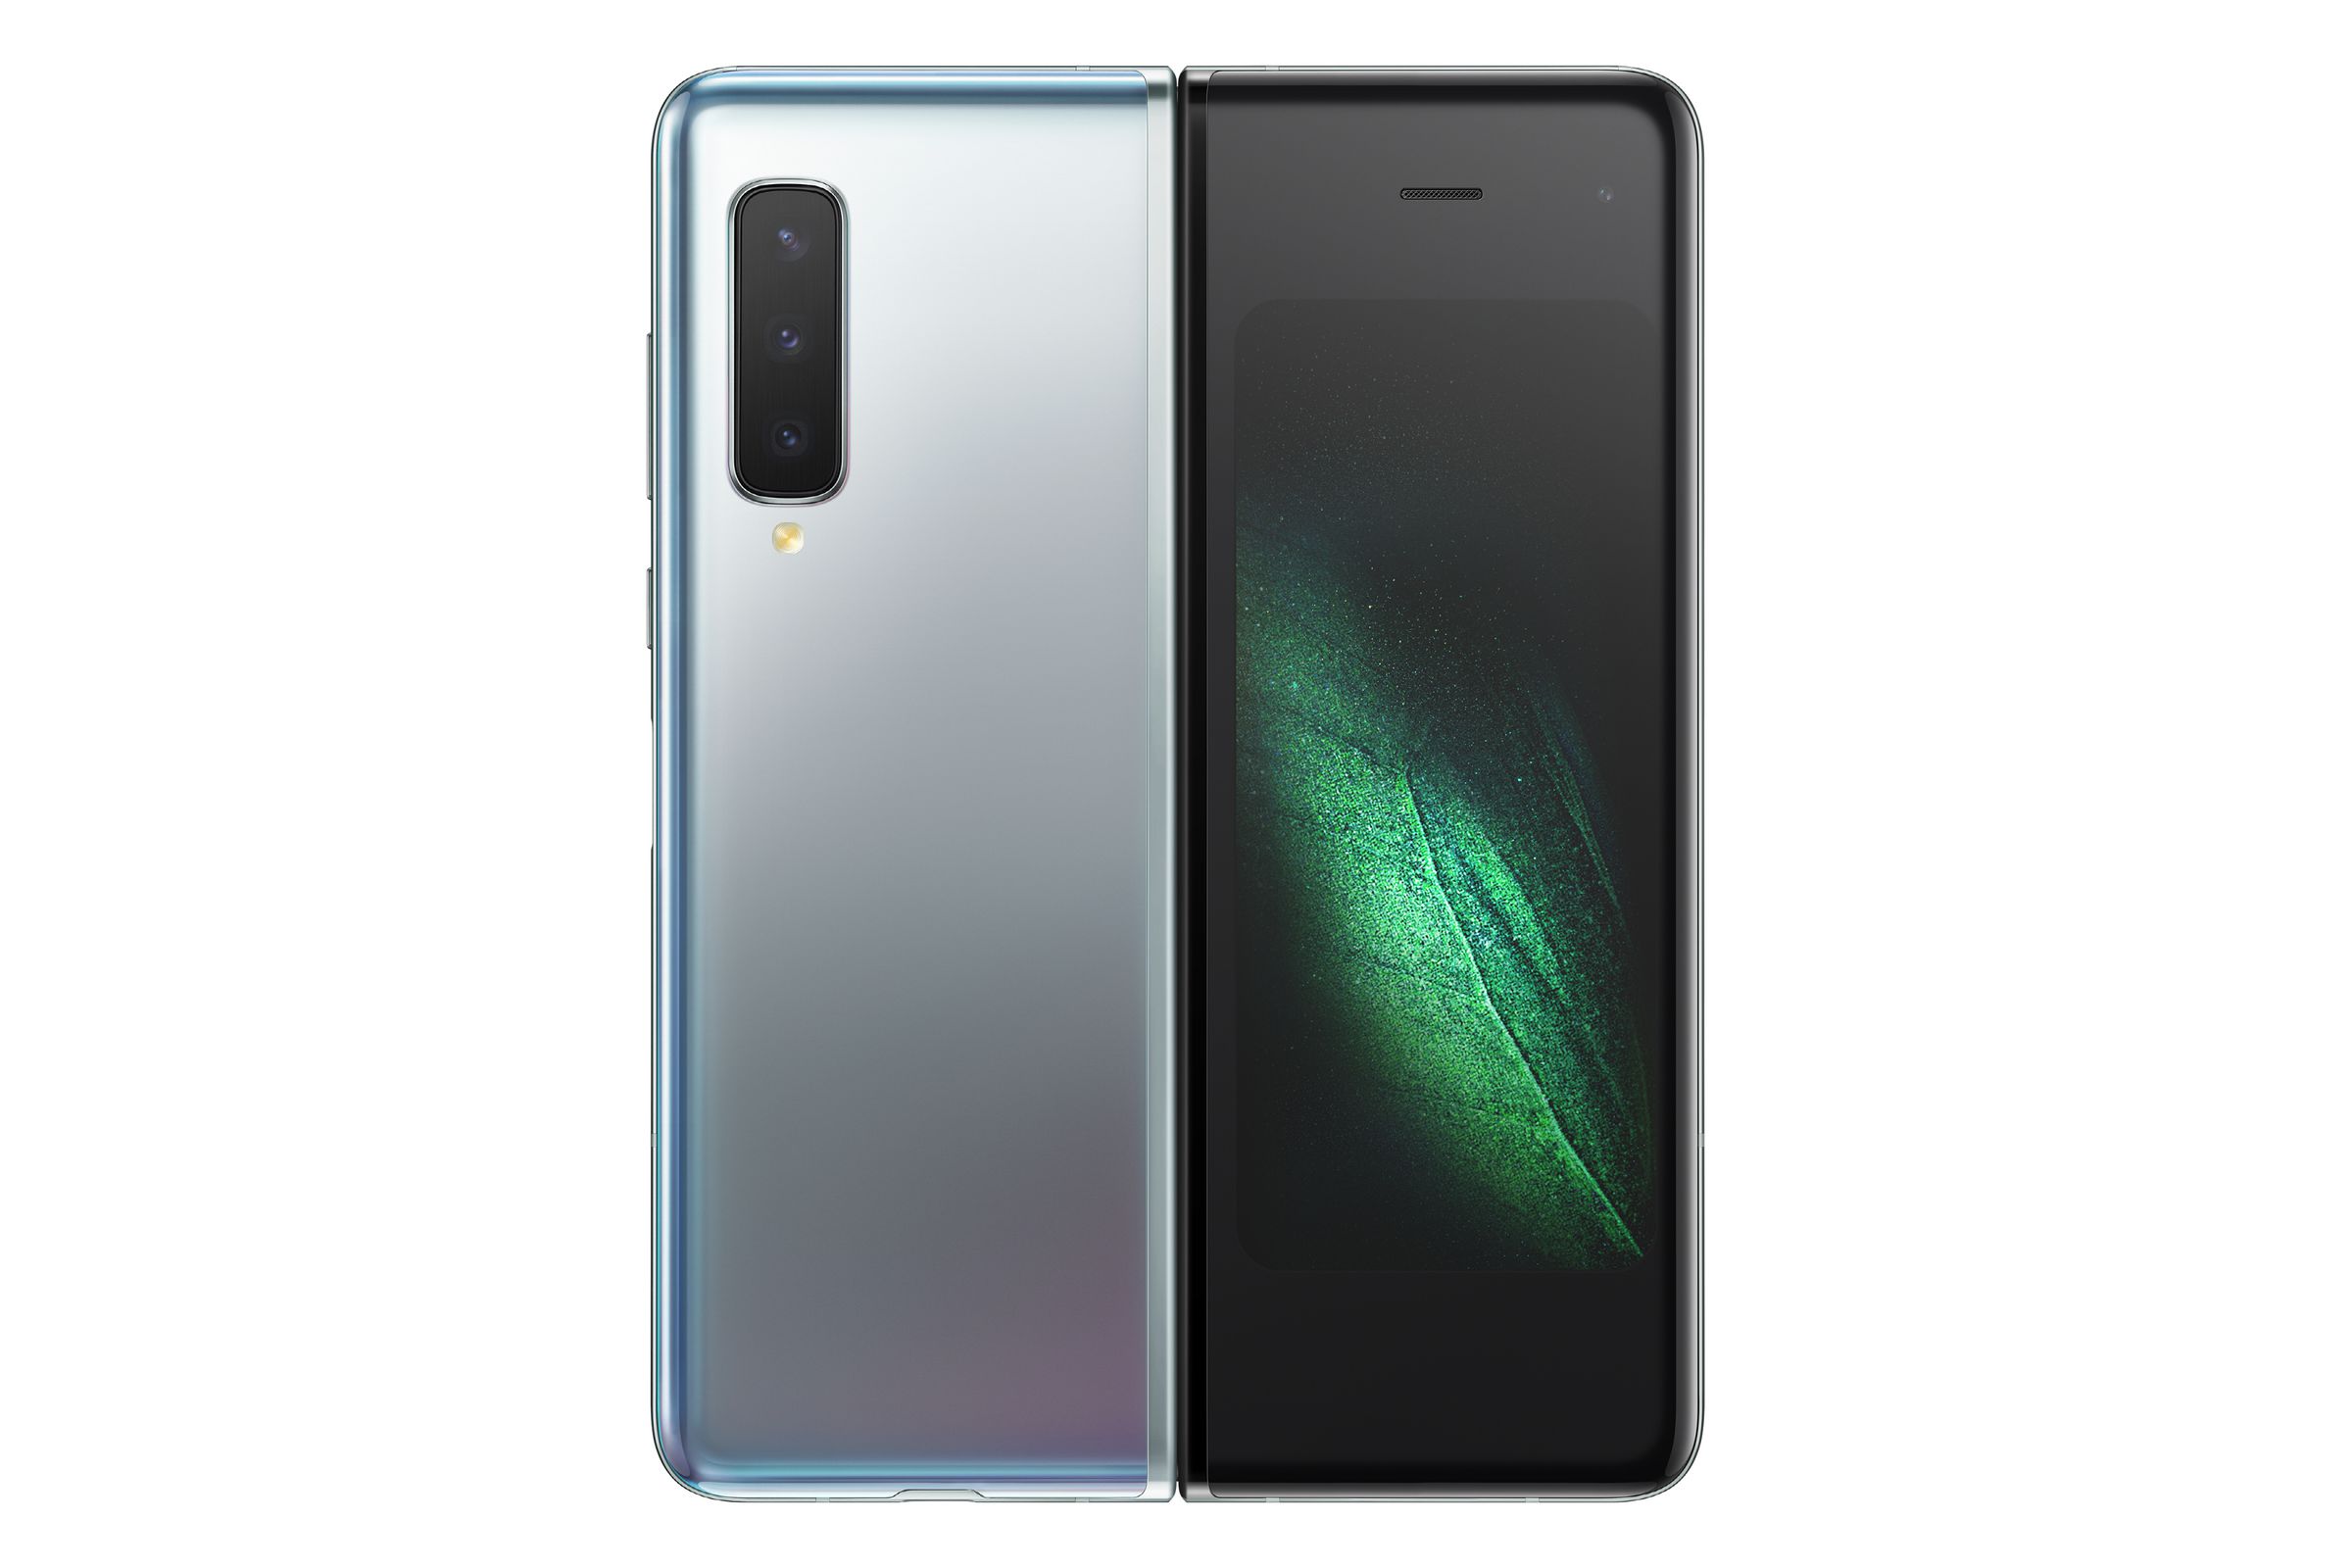 The 4.6-inch screen on the outside of the Galaxy Fold is framed by enormous bezels at top and bottom.